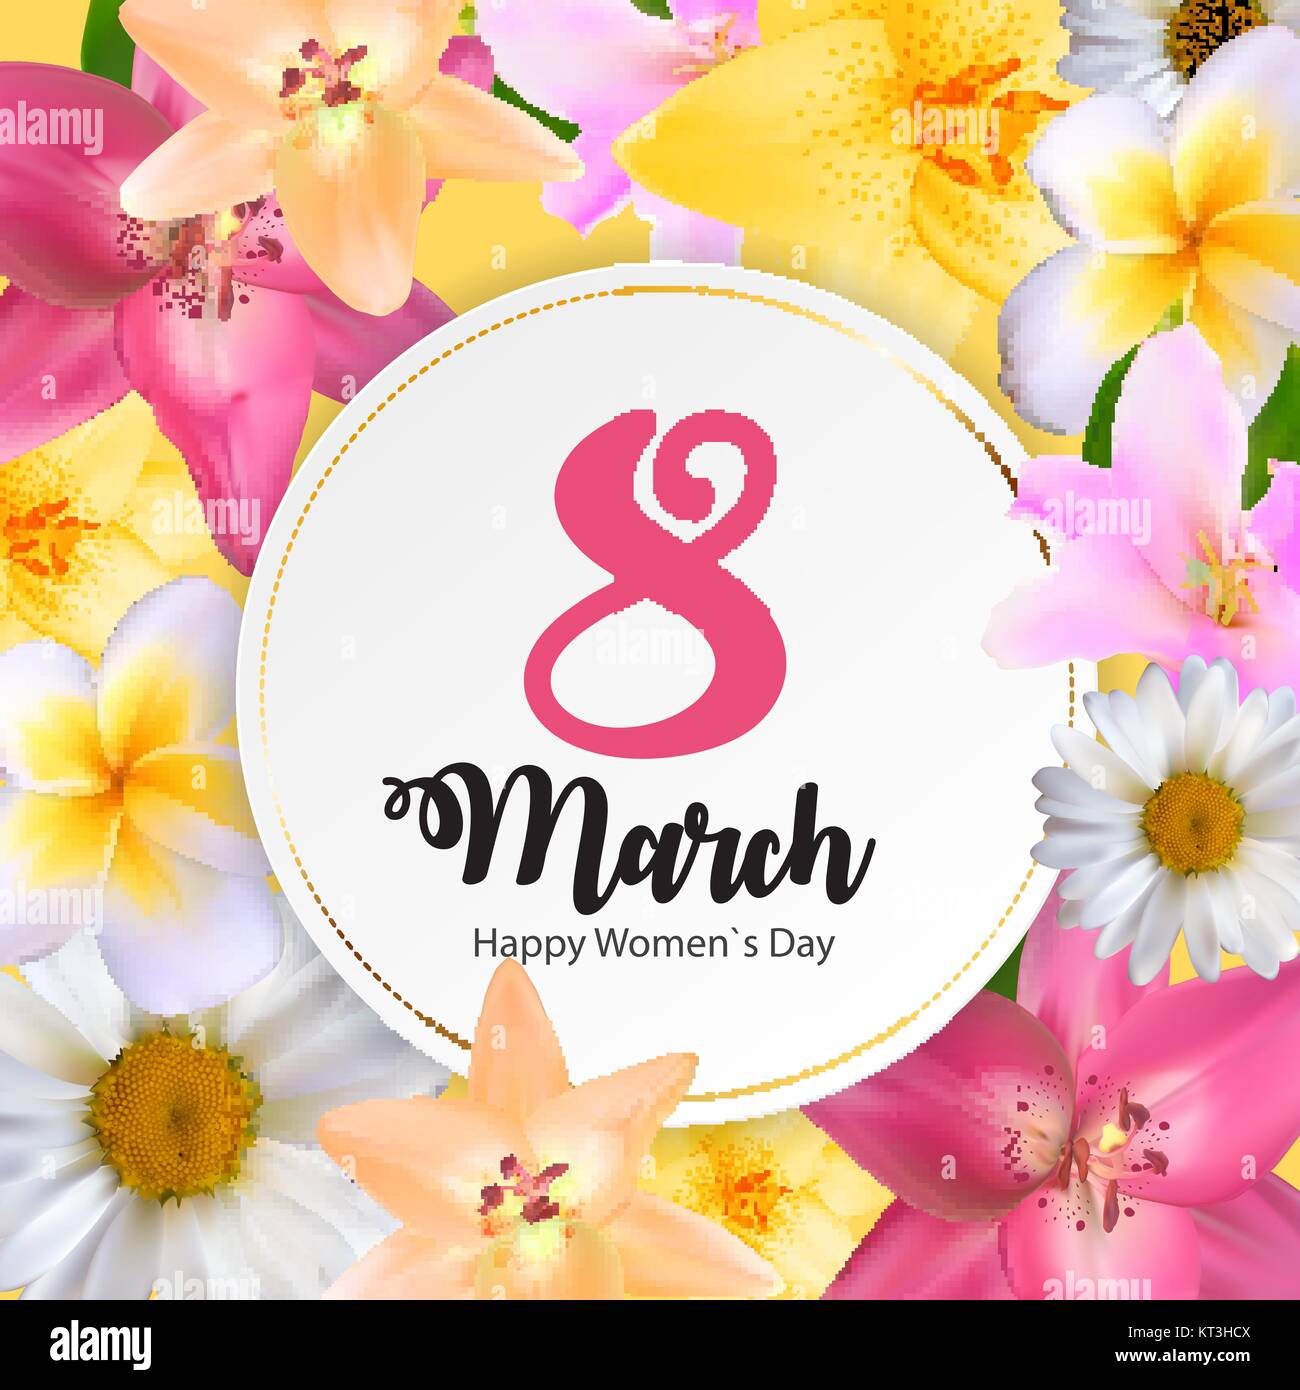 Poster International Happy Women's Day 8 March Floral Greeting Stock Vector